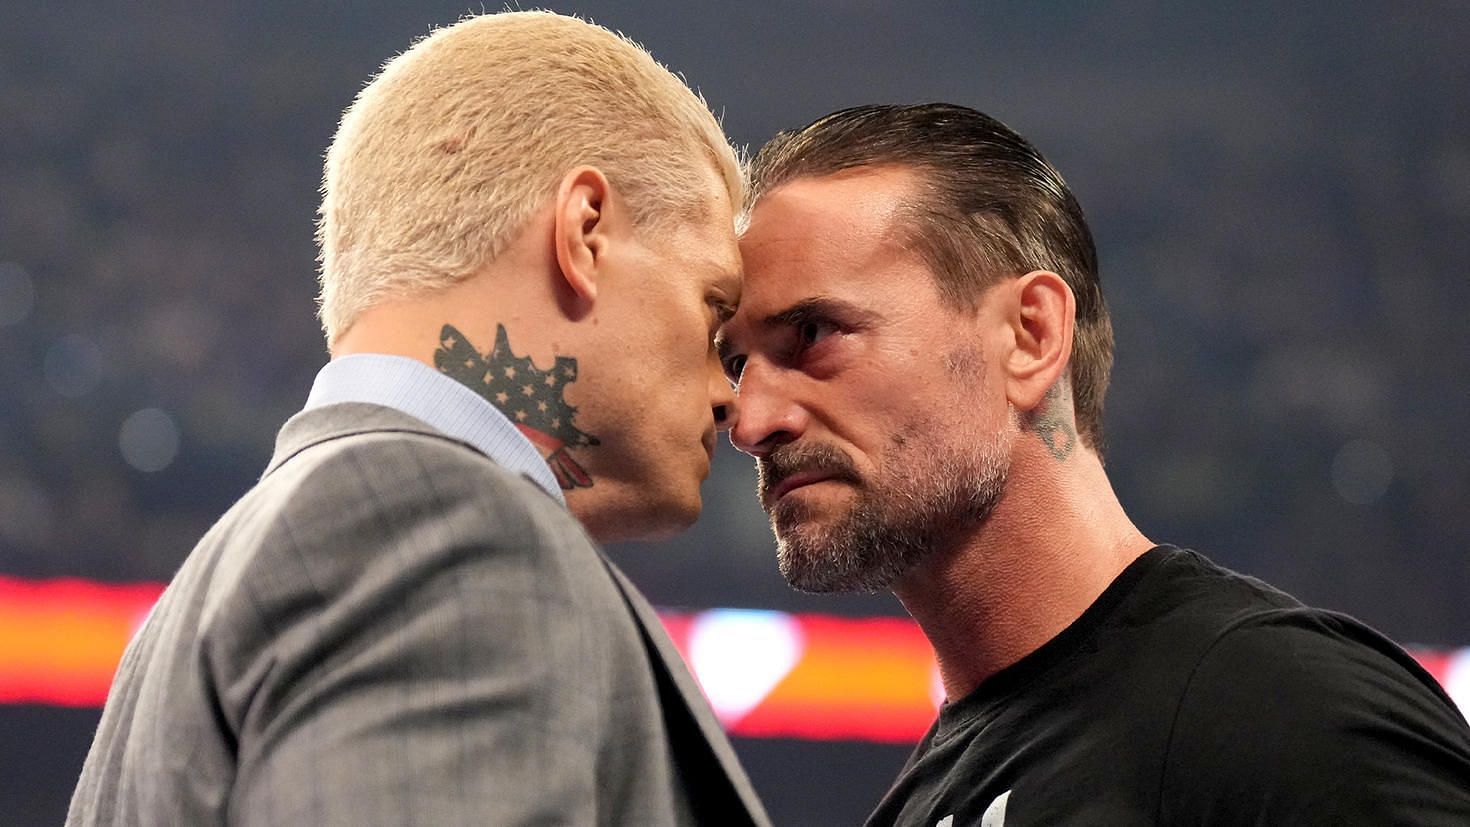 CM Punk and Cody Rhodes were the last two men in the Royal Rumble